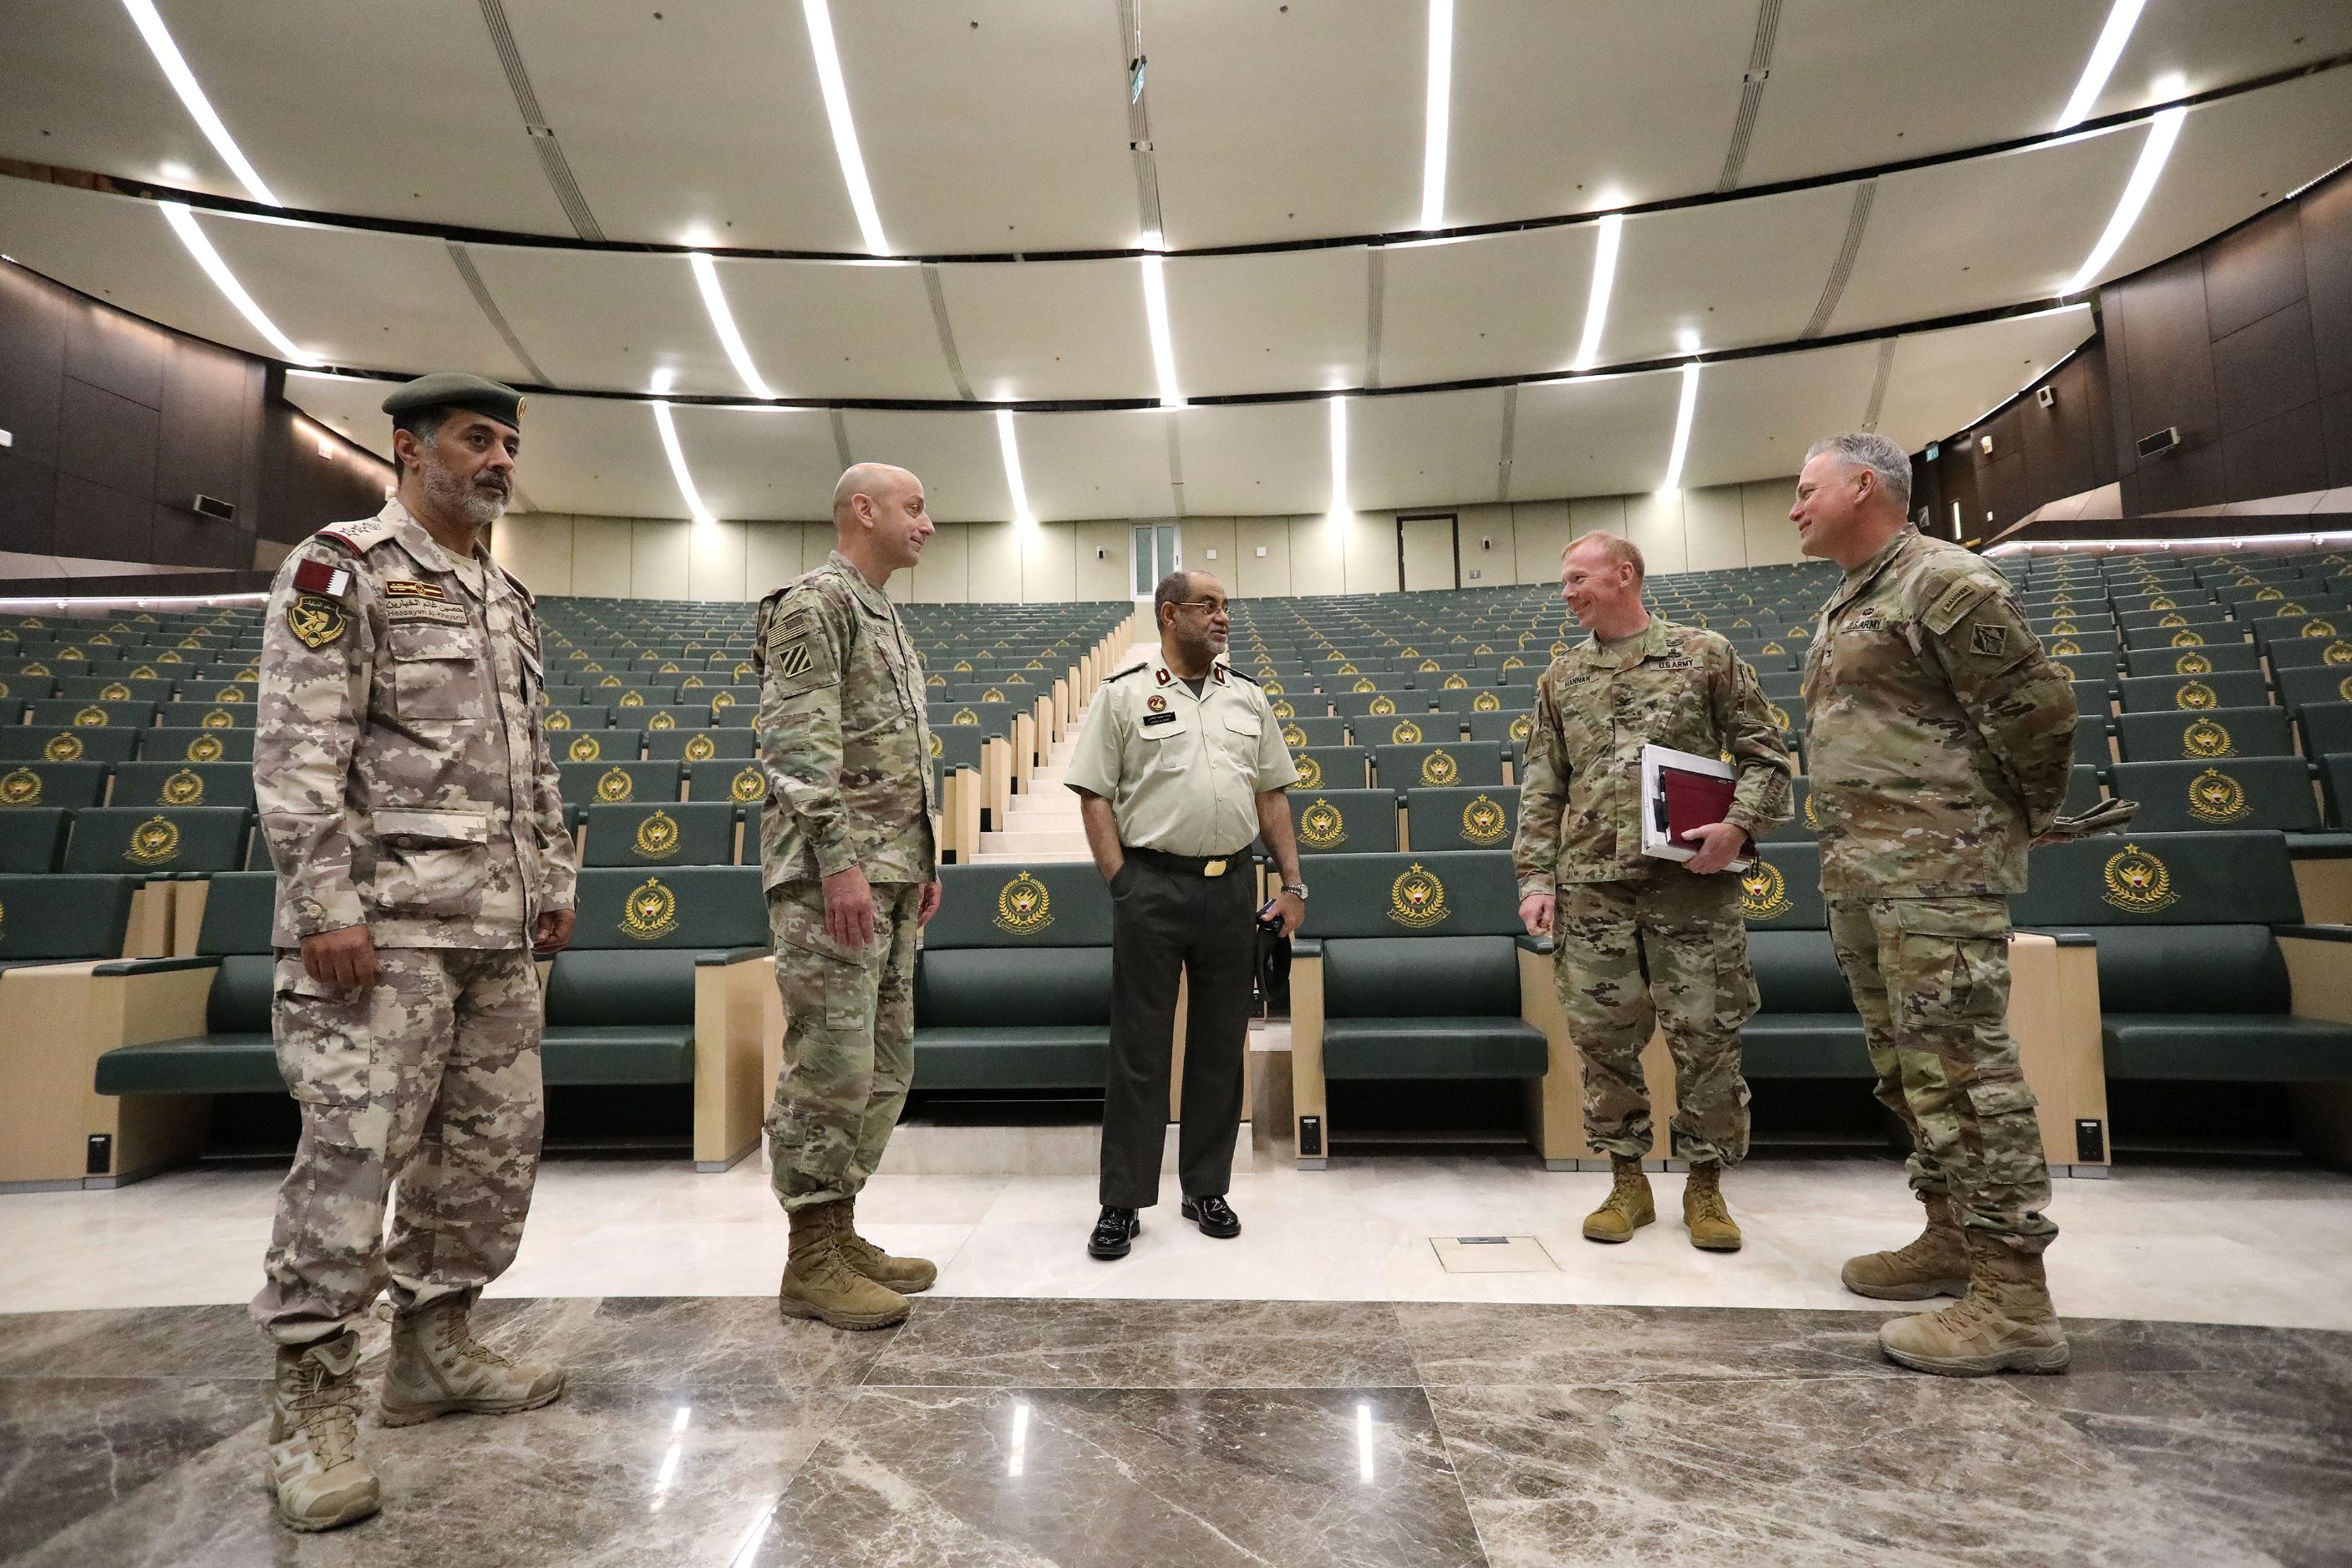 BG Hamed Mohammed M A Alyafei, the Director of Administration Human Resources of the Air Defense Operations Center (ADOC) for the Qatar Emiri Air Defense Forces (QEADF) and COL Al-Khayarin, Commander of the Air Defense Operations Center (ADOC) meet with Lt. Gen.